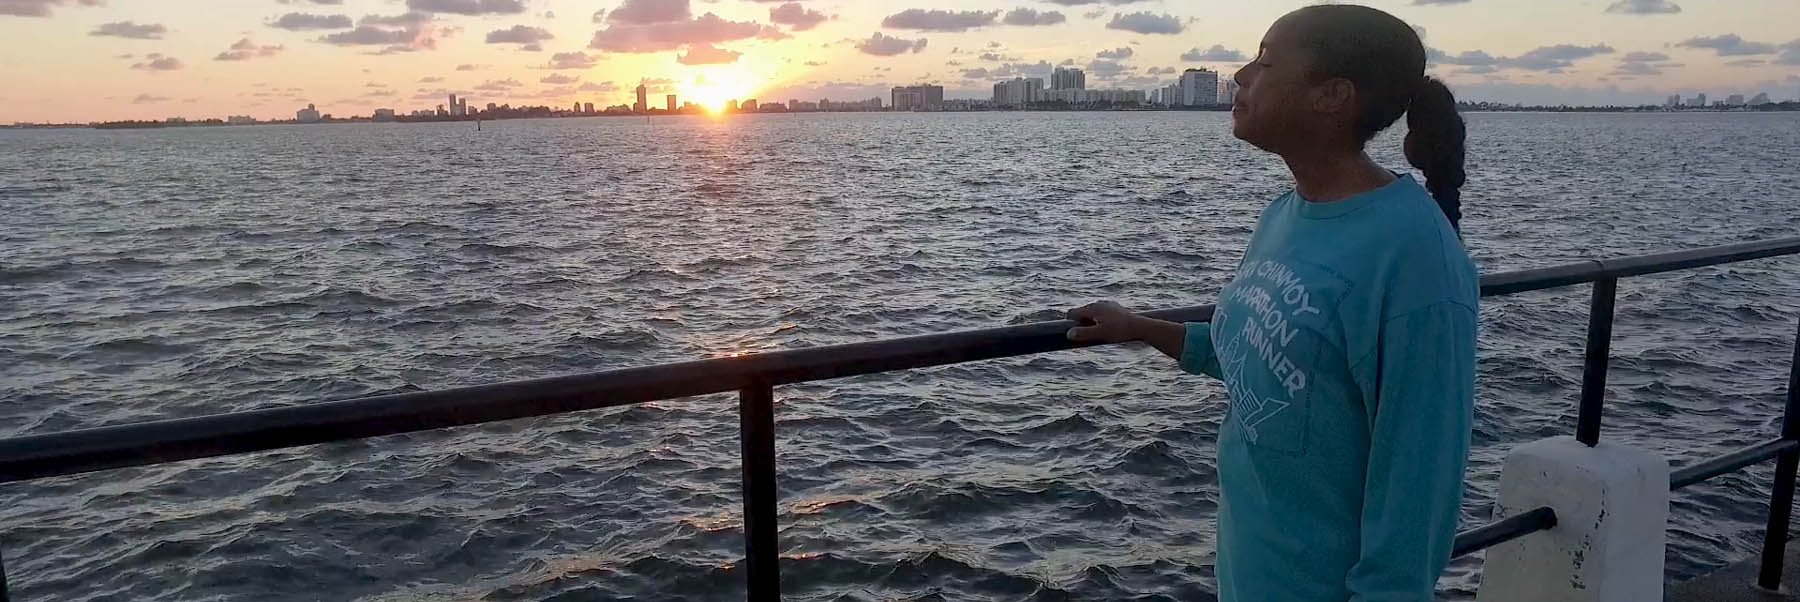 Woman looking our over the Miami intercostal waterway with the city skyline and sunset in the background